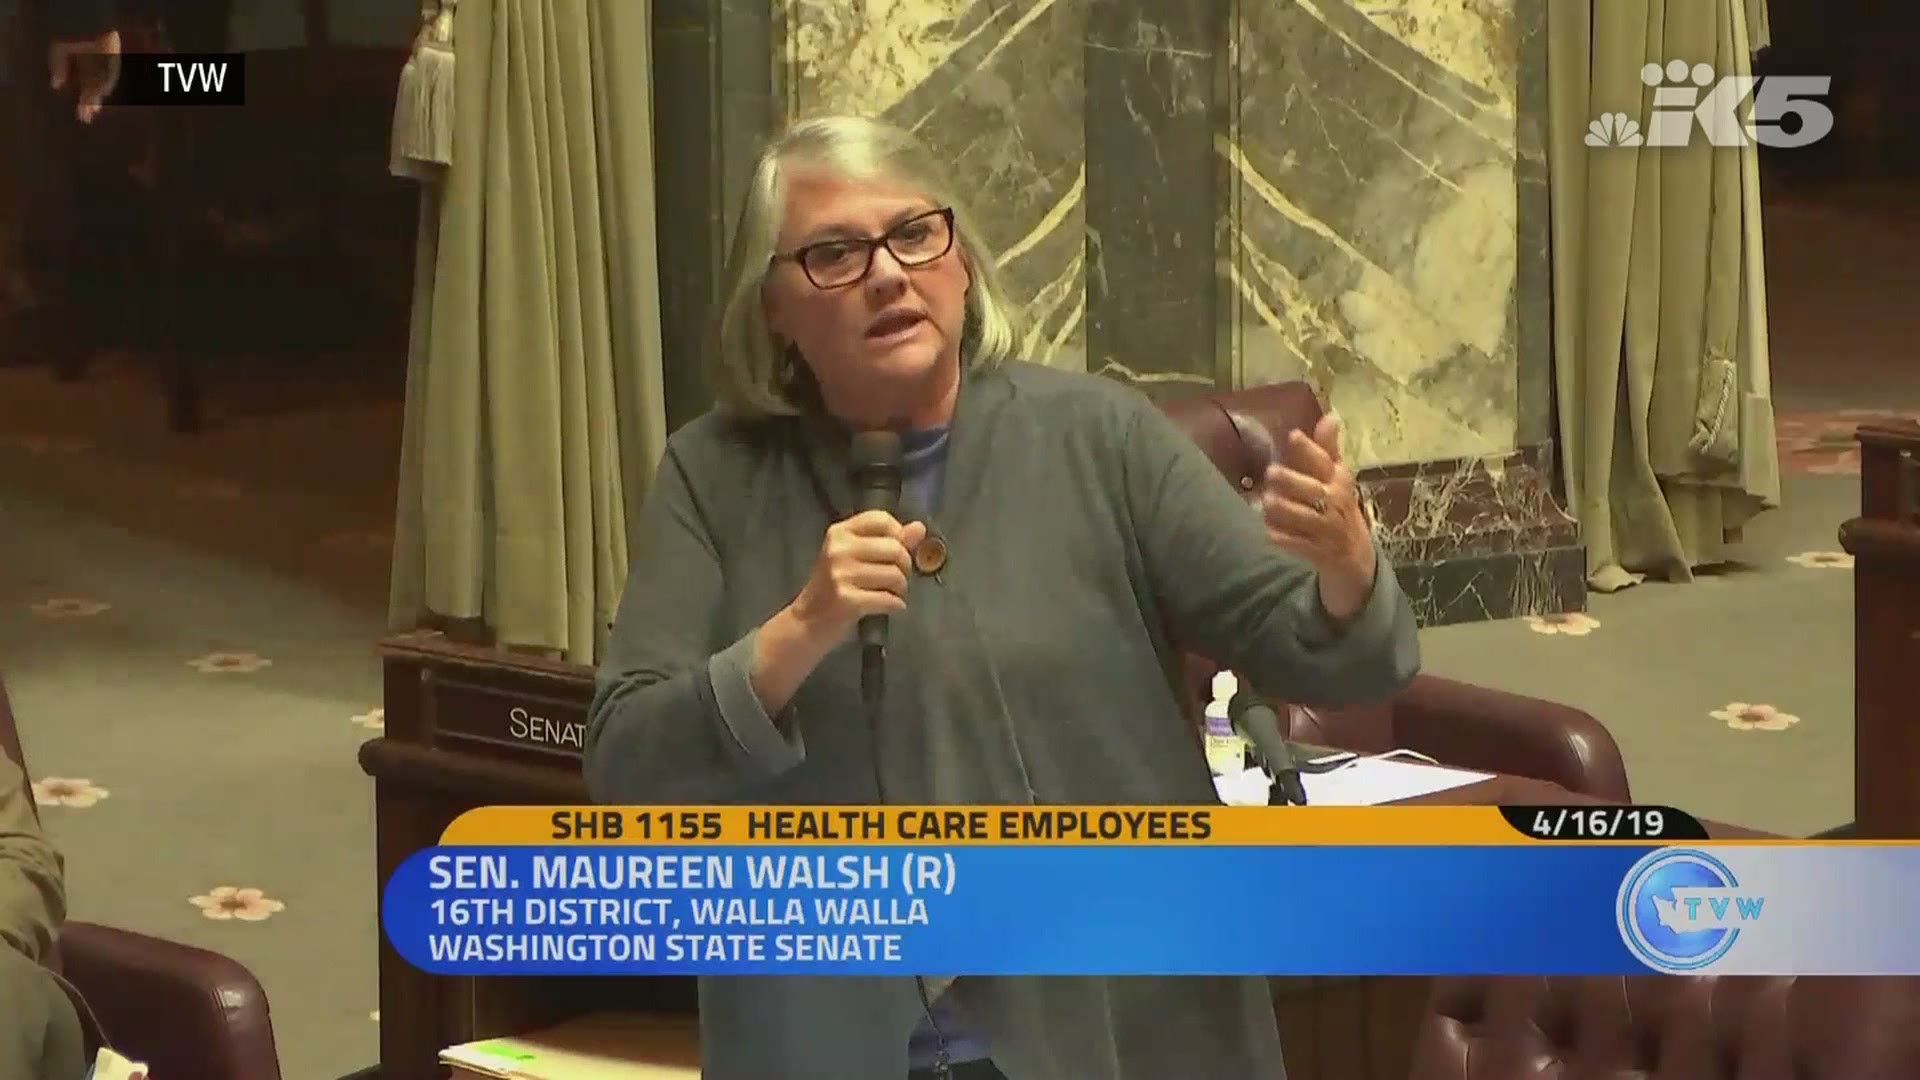 More than 600,000 people have signed an online petition calling for Washington state Senator Maureen Walsh to shadow a nurse for a day after comments she made on the Senate floor last week.